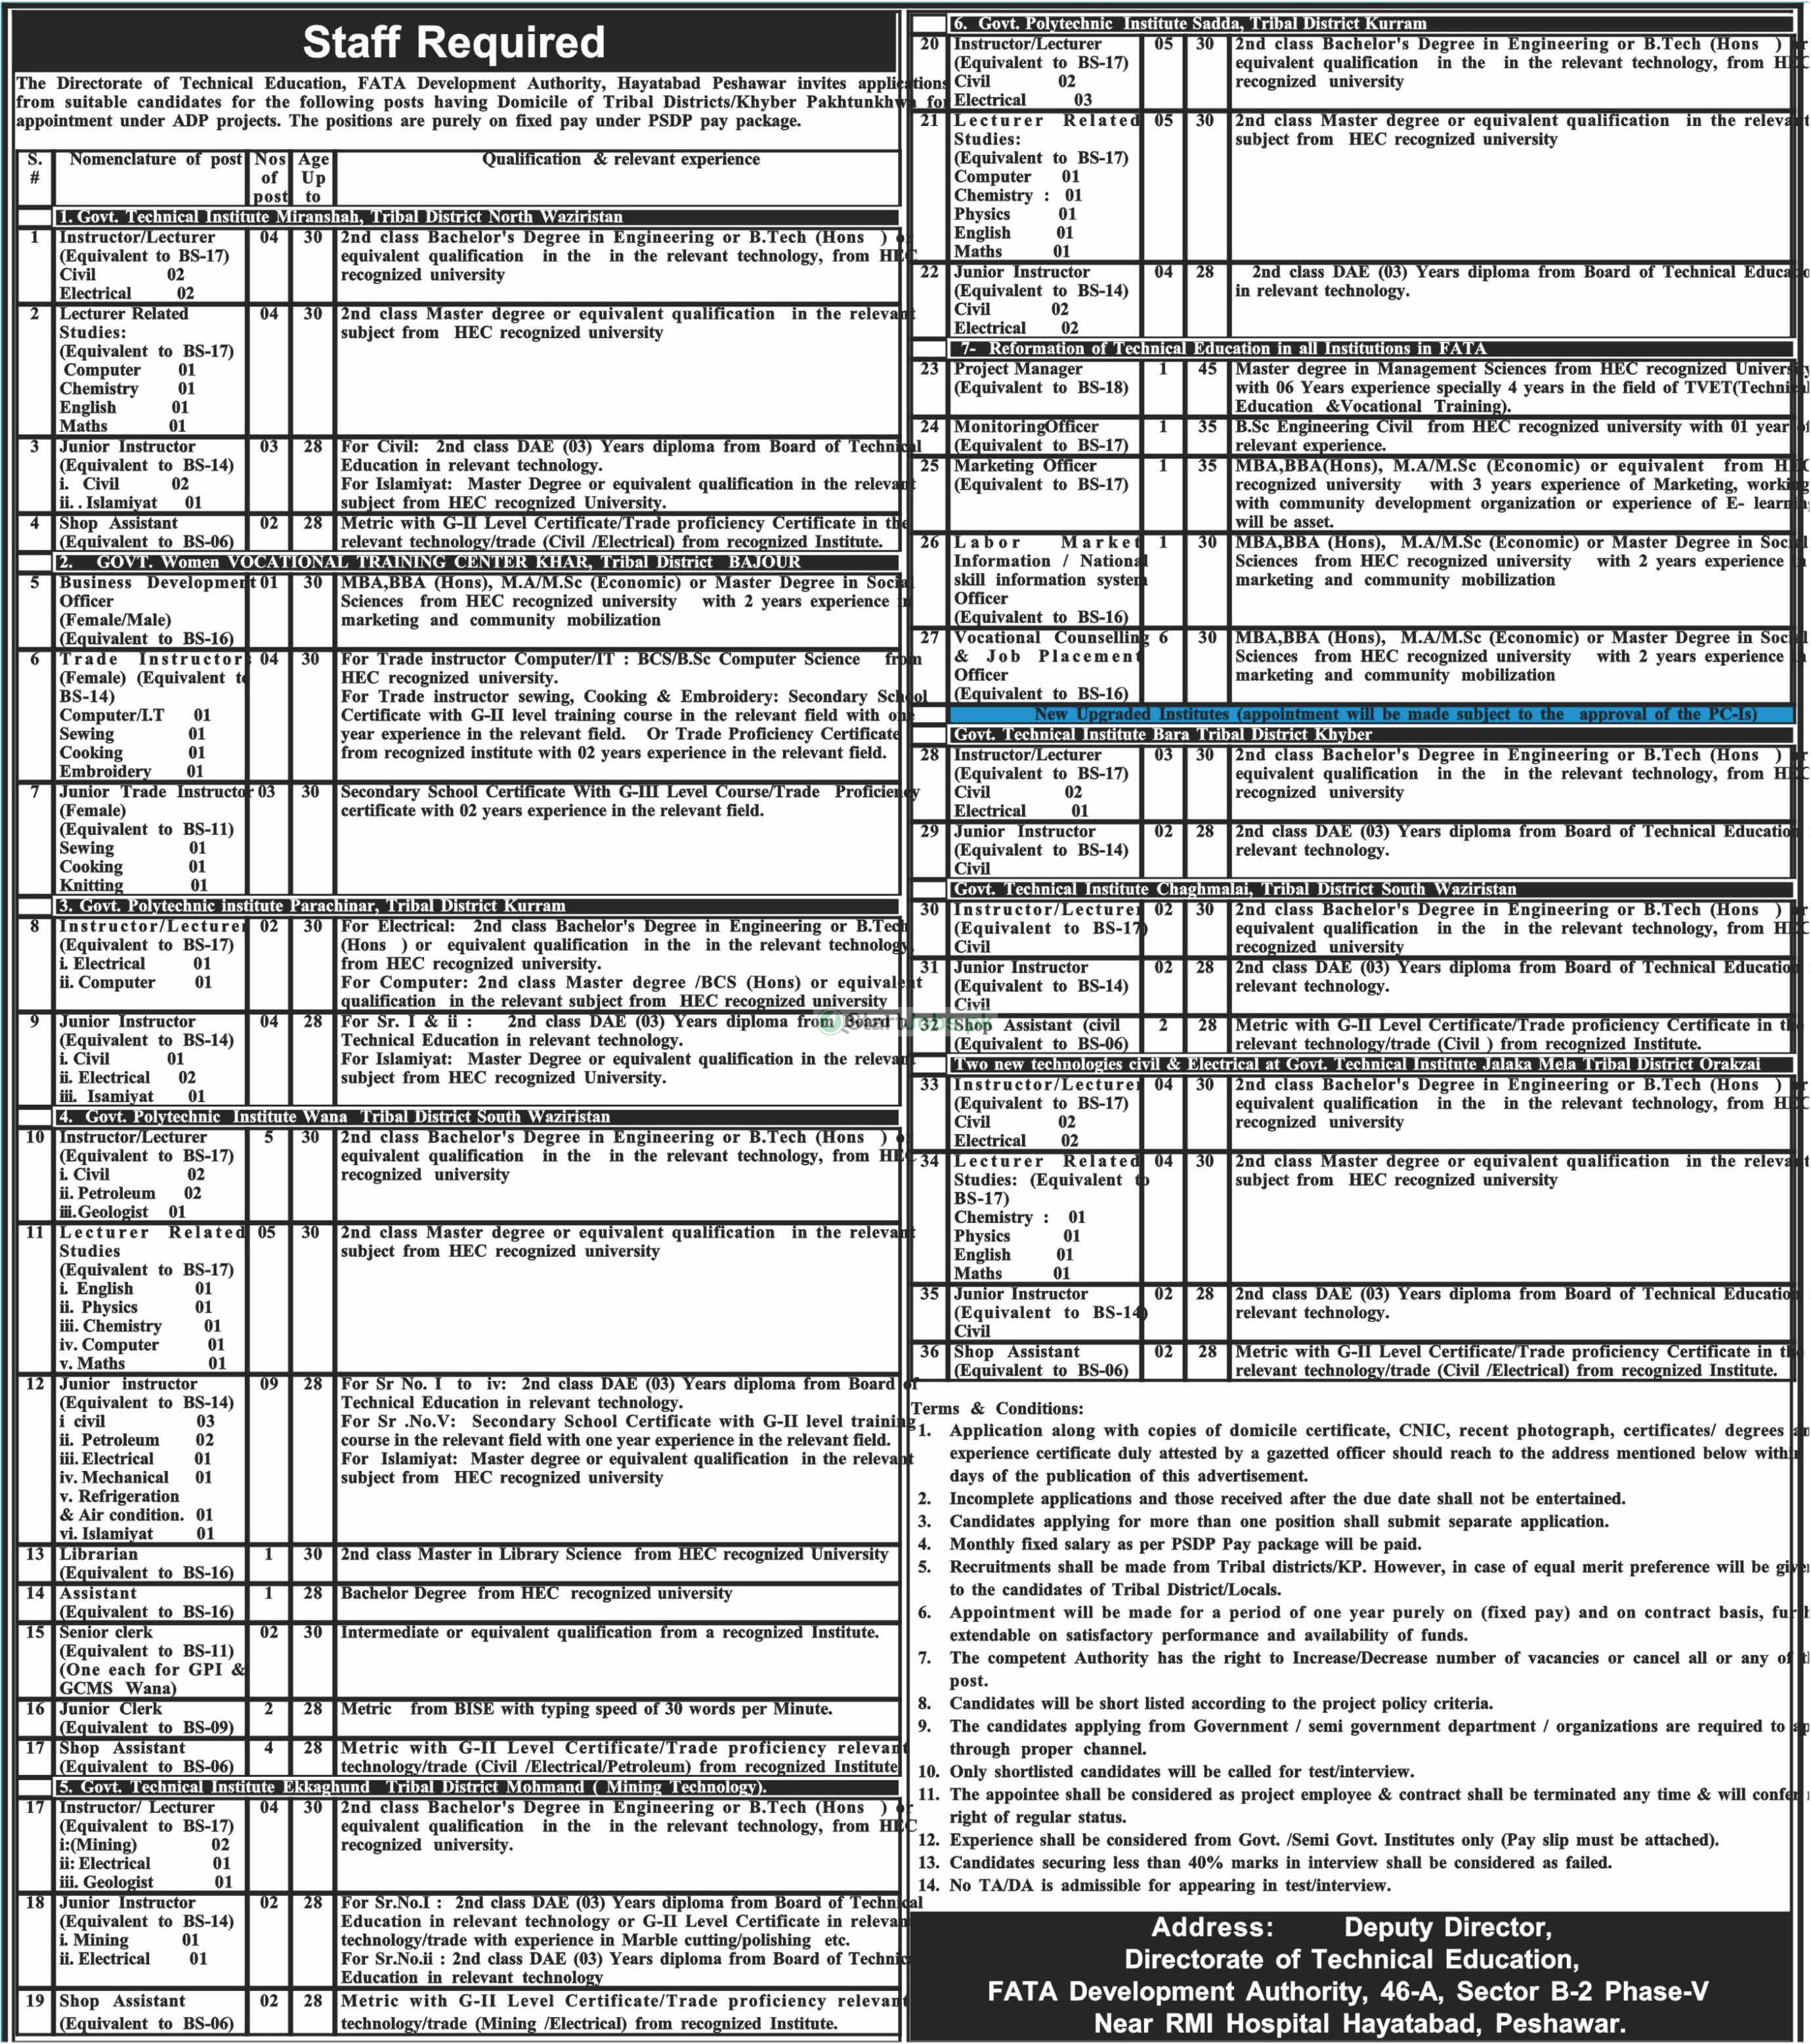 FATA Development Authority 109 Jobs For Instructor , Lecturer & Others